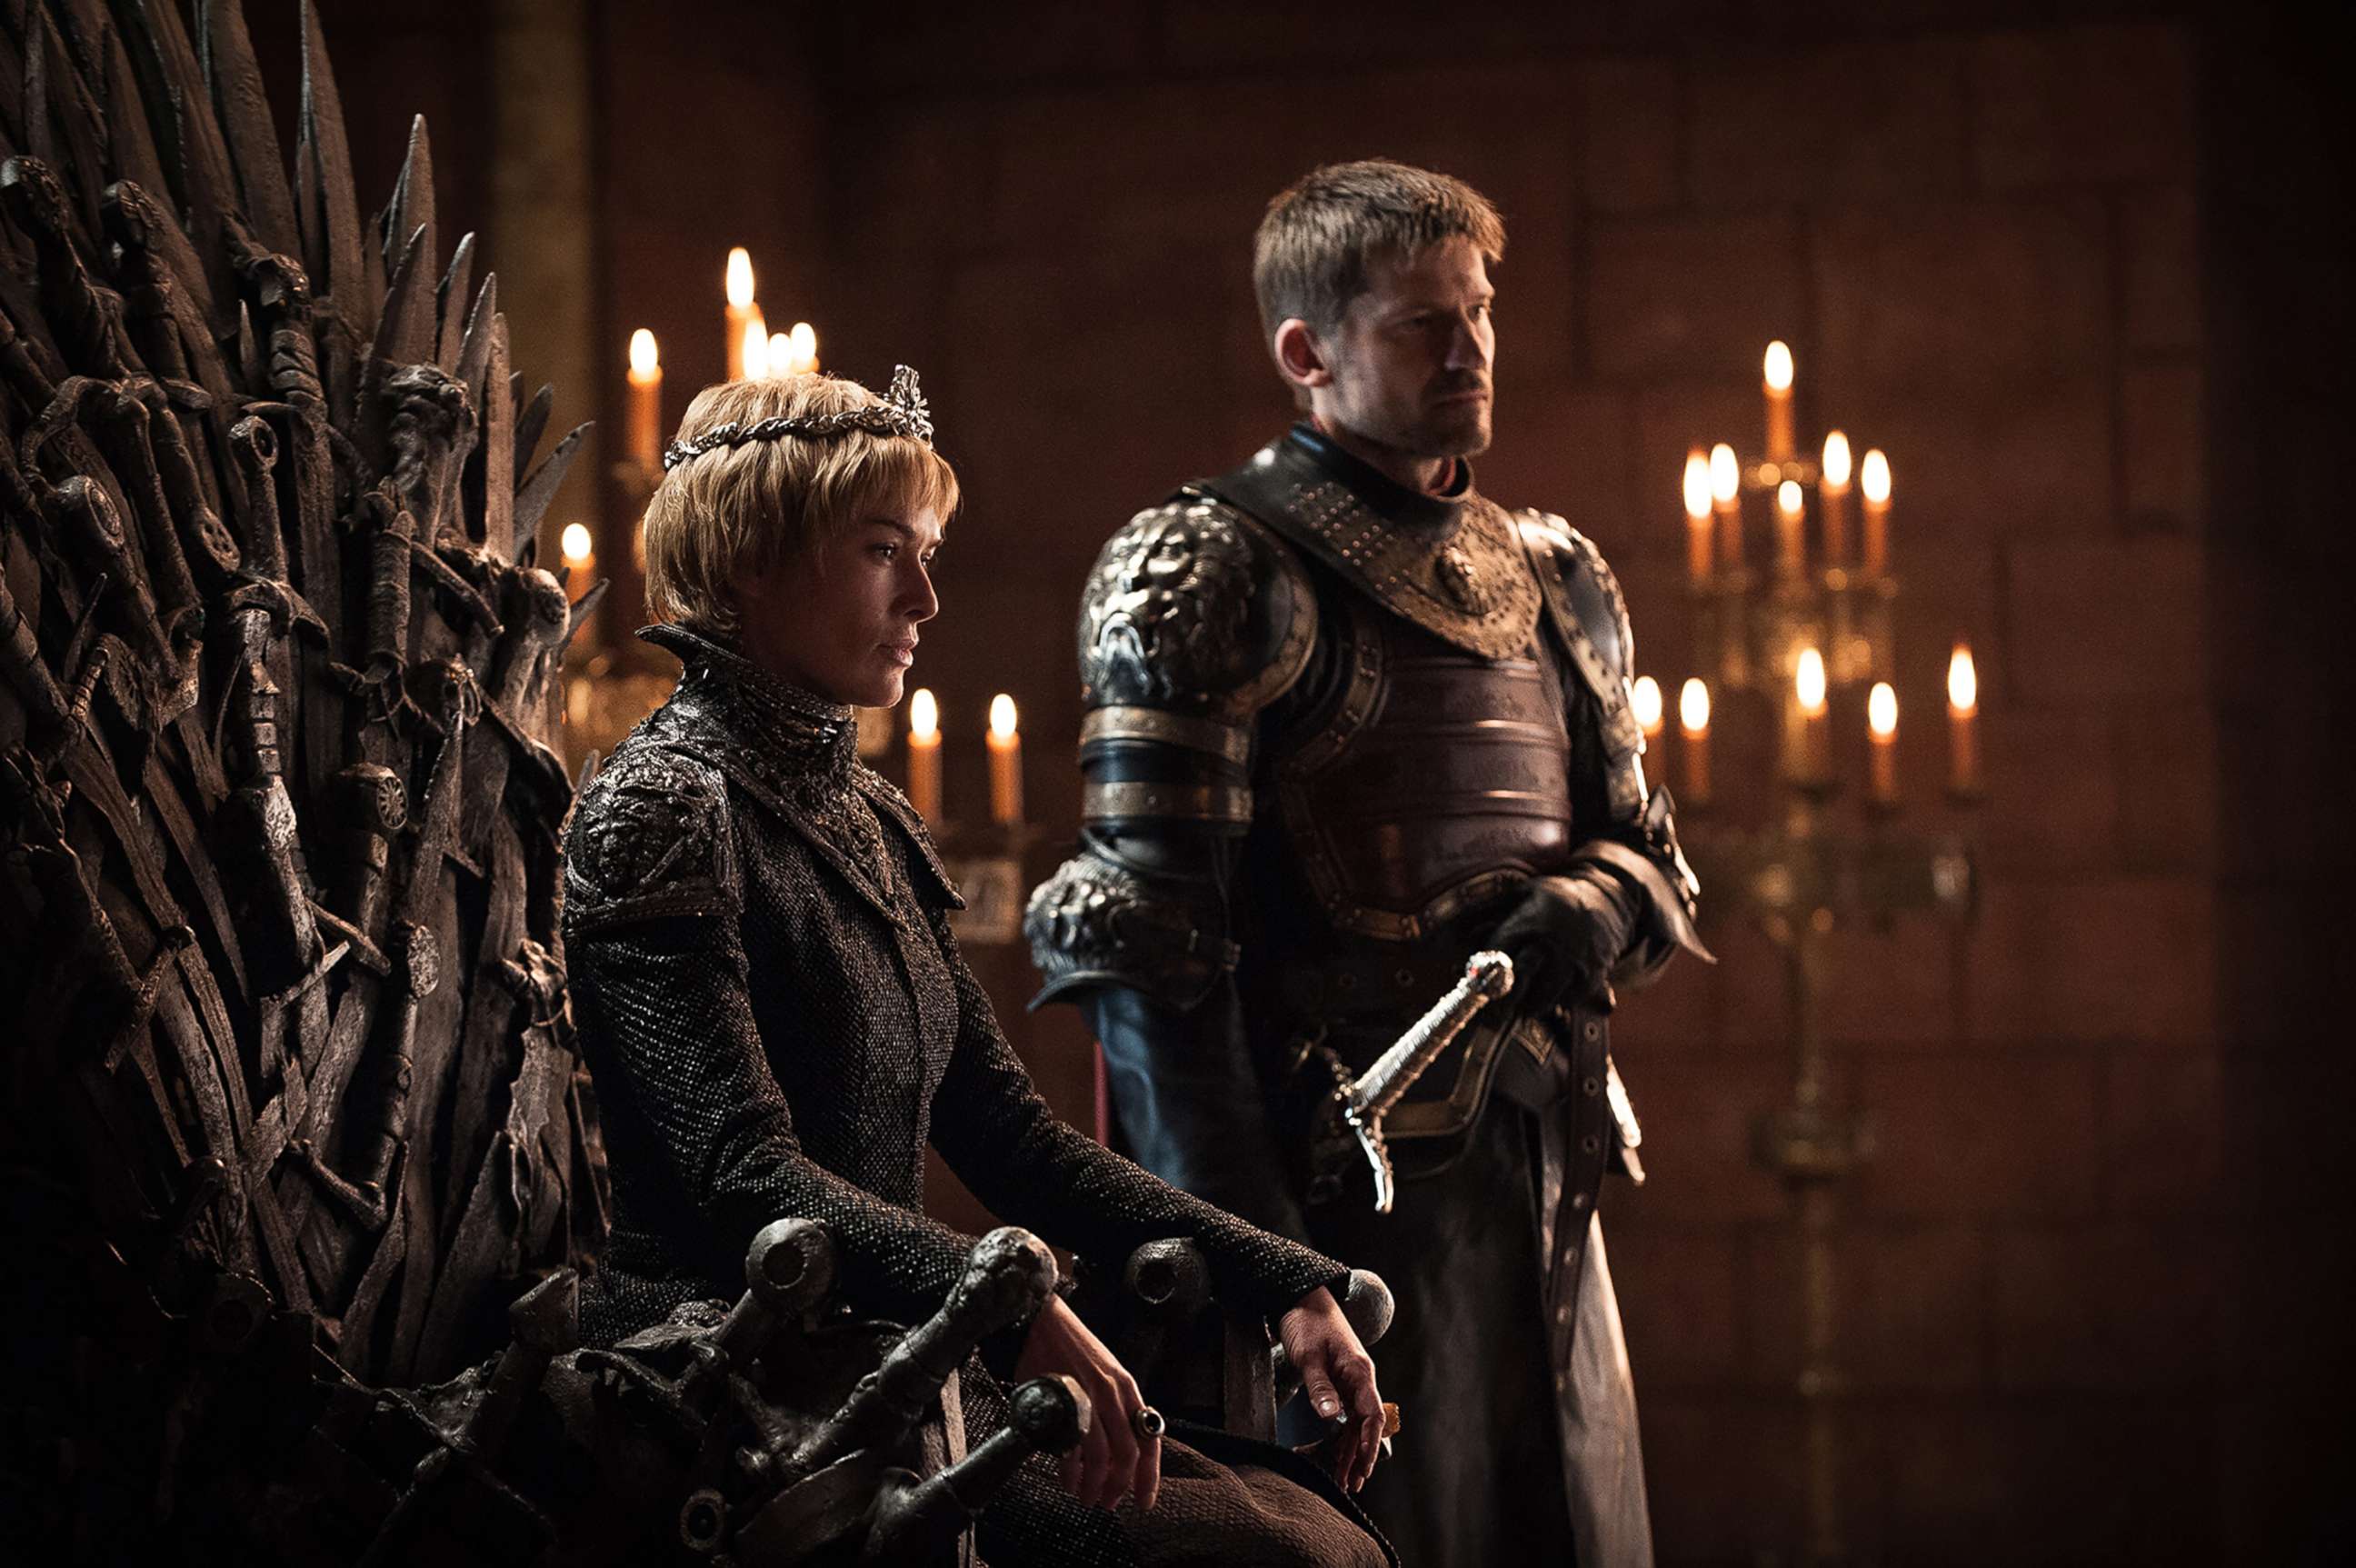 PHOTO: Lena Headey as Cersei Lannister and Nikolaj Coster-Waldau as Jaime Lannister in the "Game of Thrones."